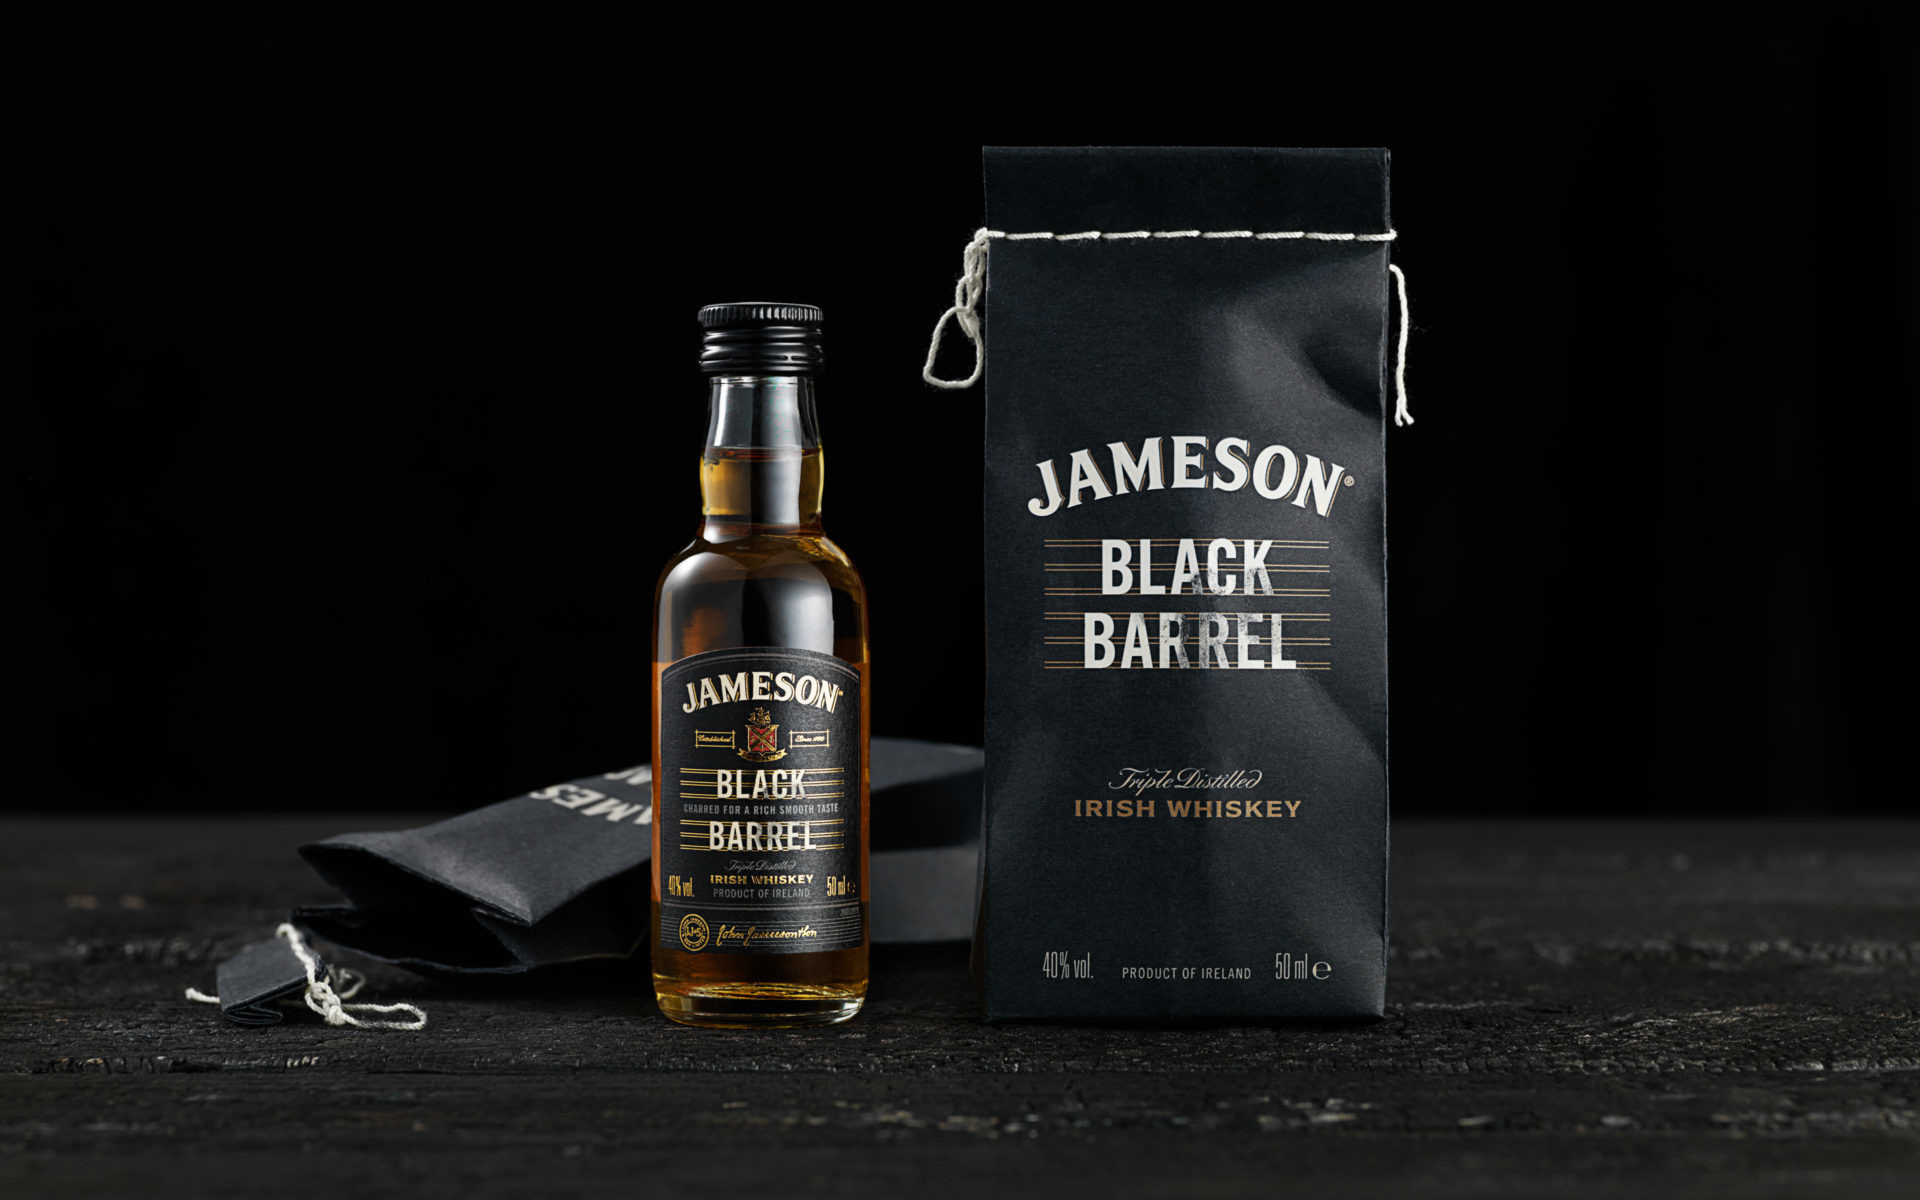 1920x1200  Jameson is the world's leading Irish whiskey producer. It is one  of the world's major spirits brands, with annual sales topping some 70  million ...